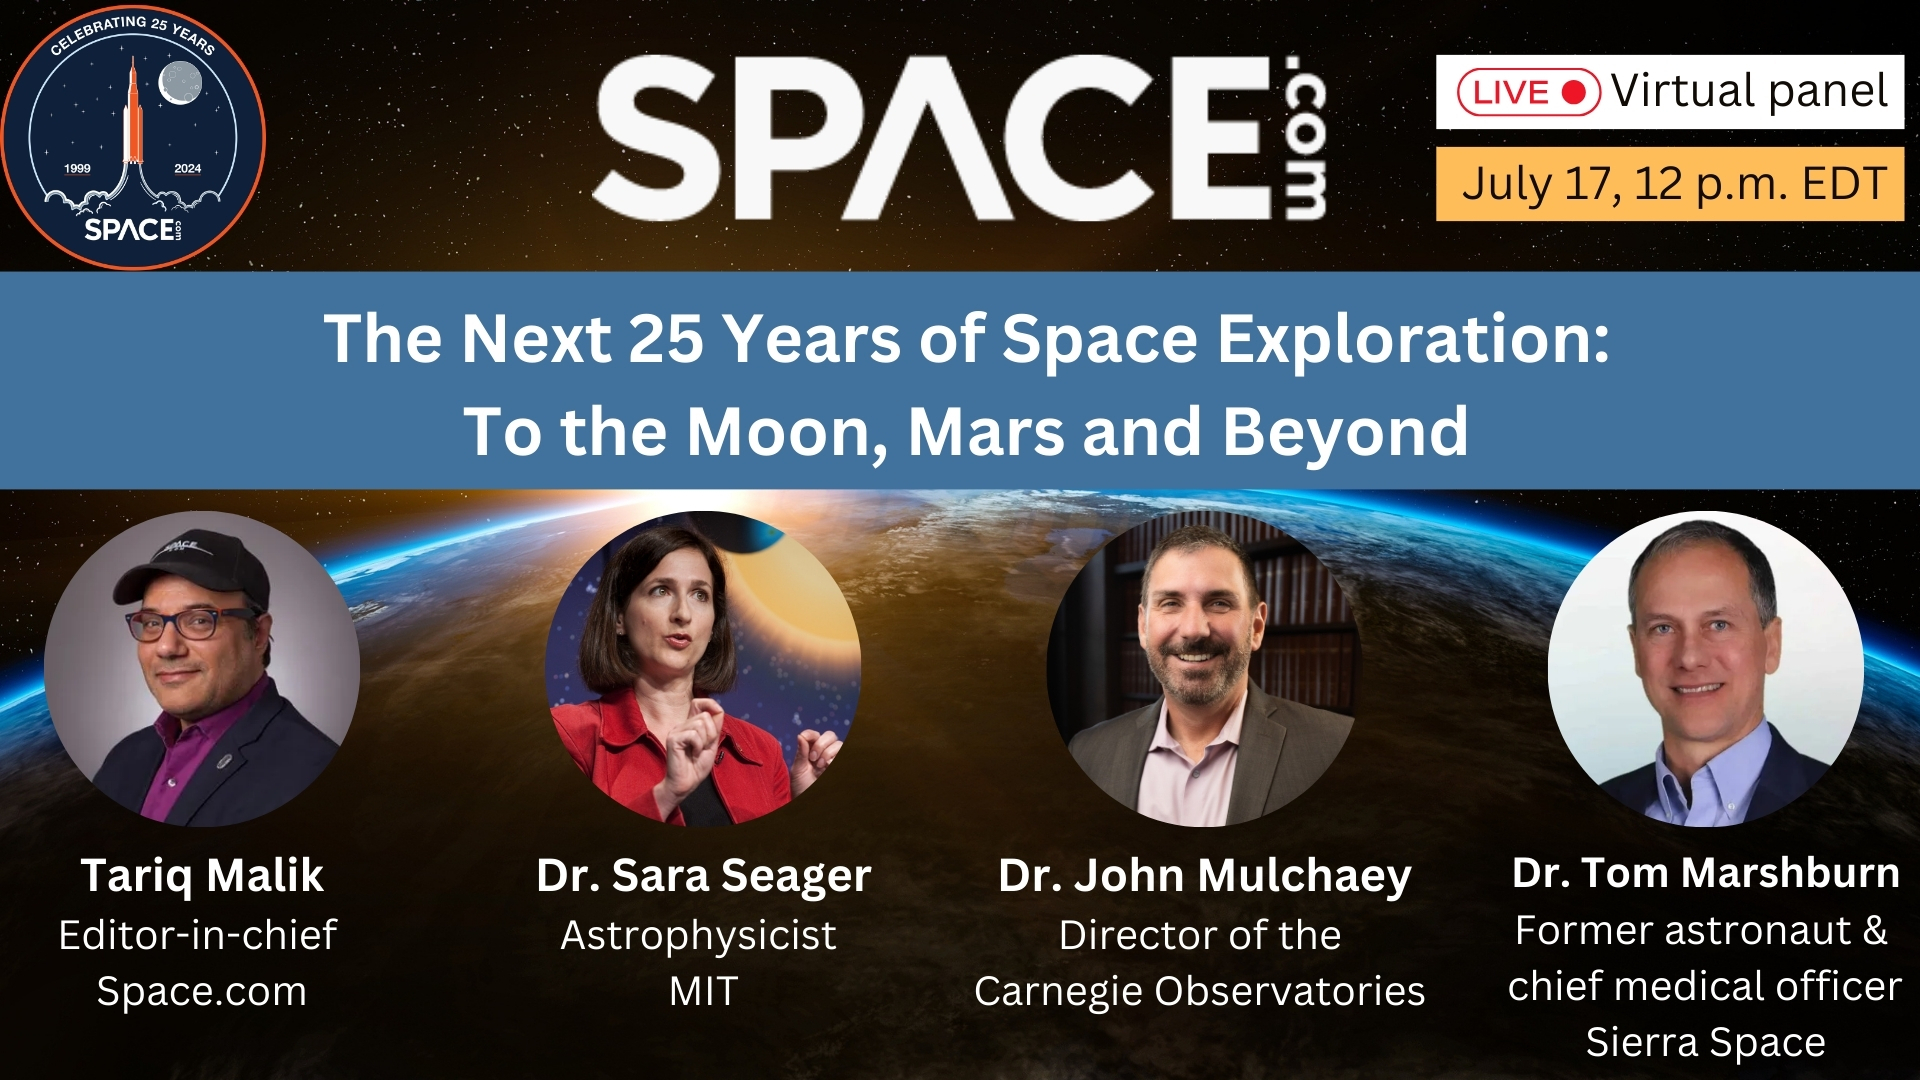  Join Space.com's 25th Anniversary Virtual Panel on July 17: The Next 25 Years of Space Exploration — To the Moon, Mars and Beyond 